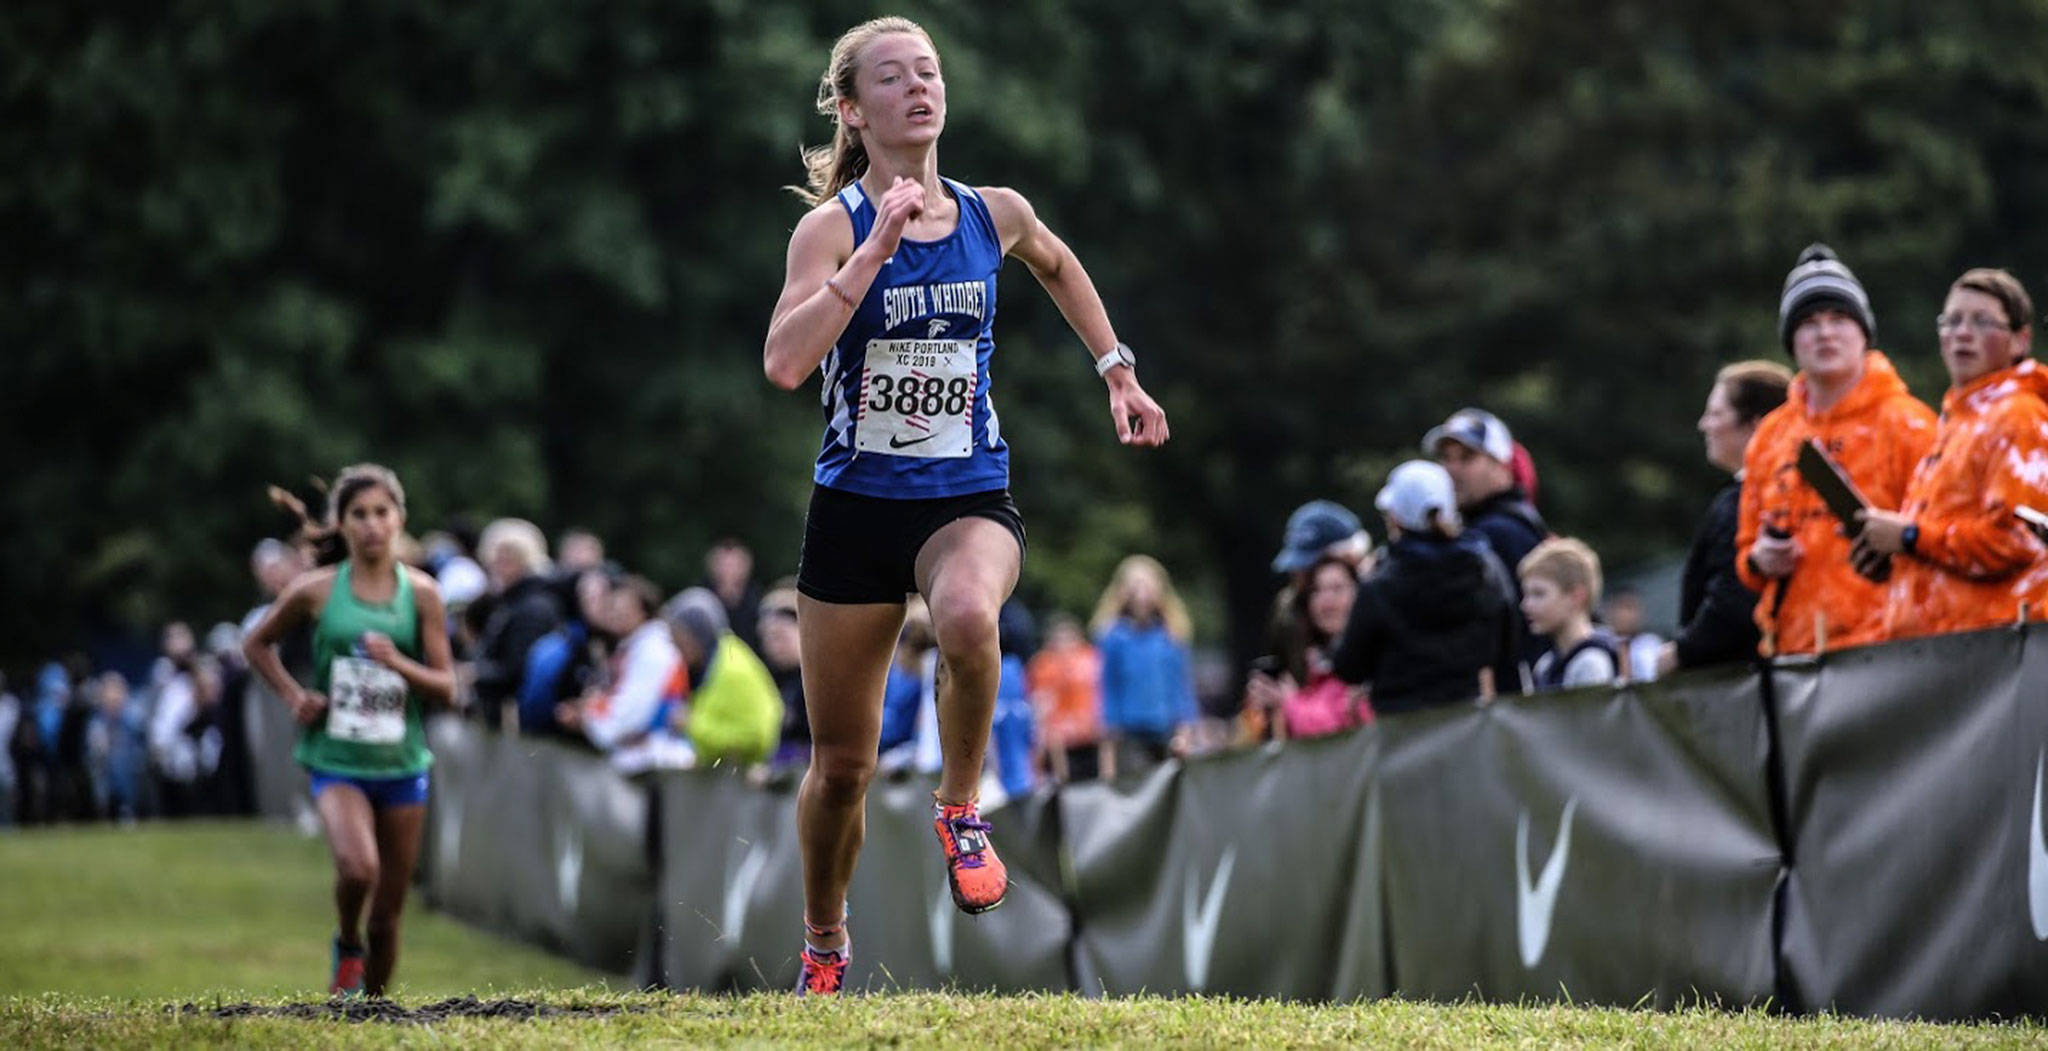 Kaia Swegler Richmond heads to the finish line in first place at the Nike Portland XC Saturday. (Photo by Matt Simms)